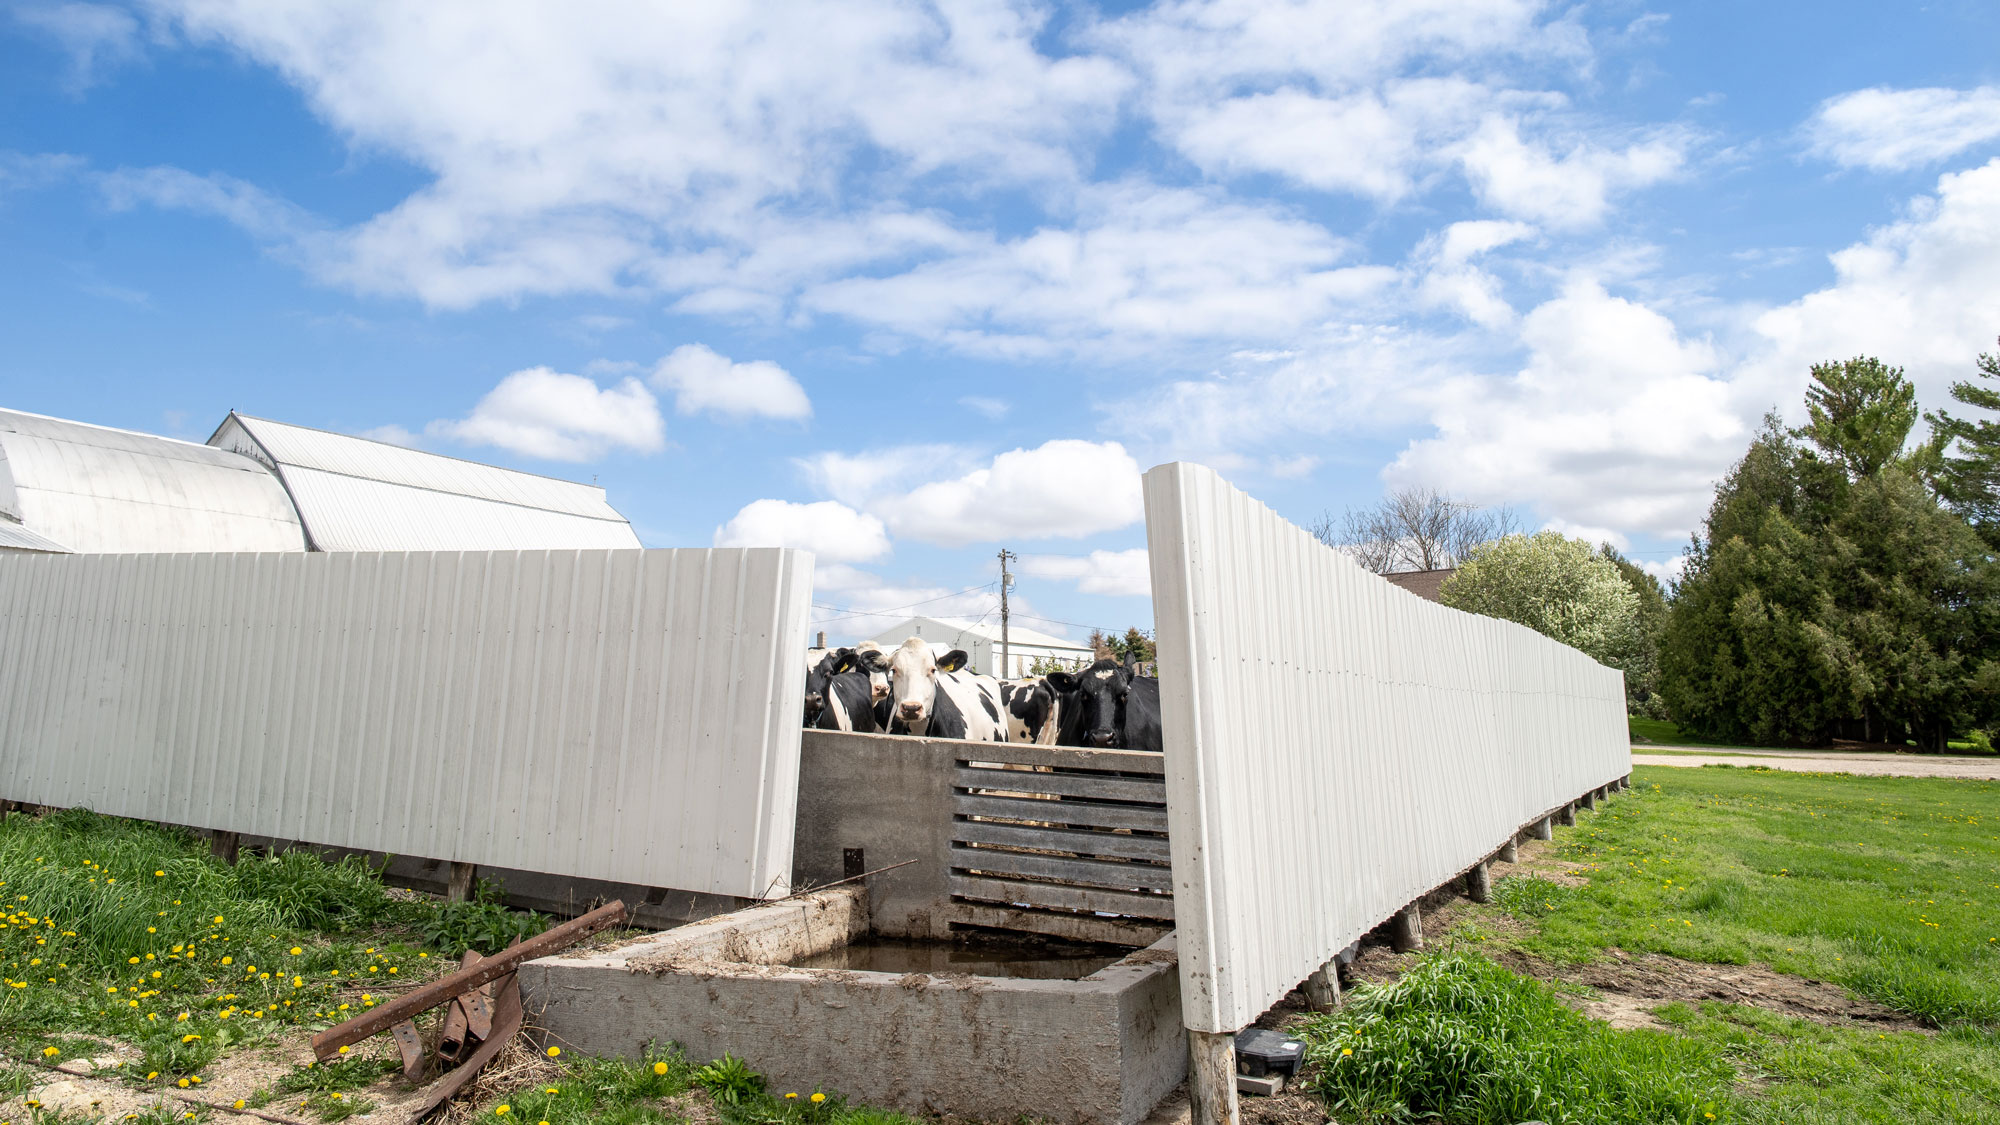 Cows behind a fence